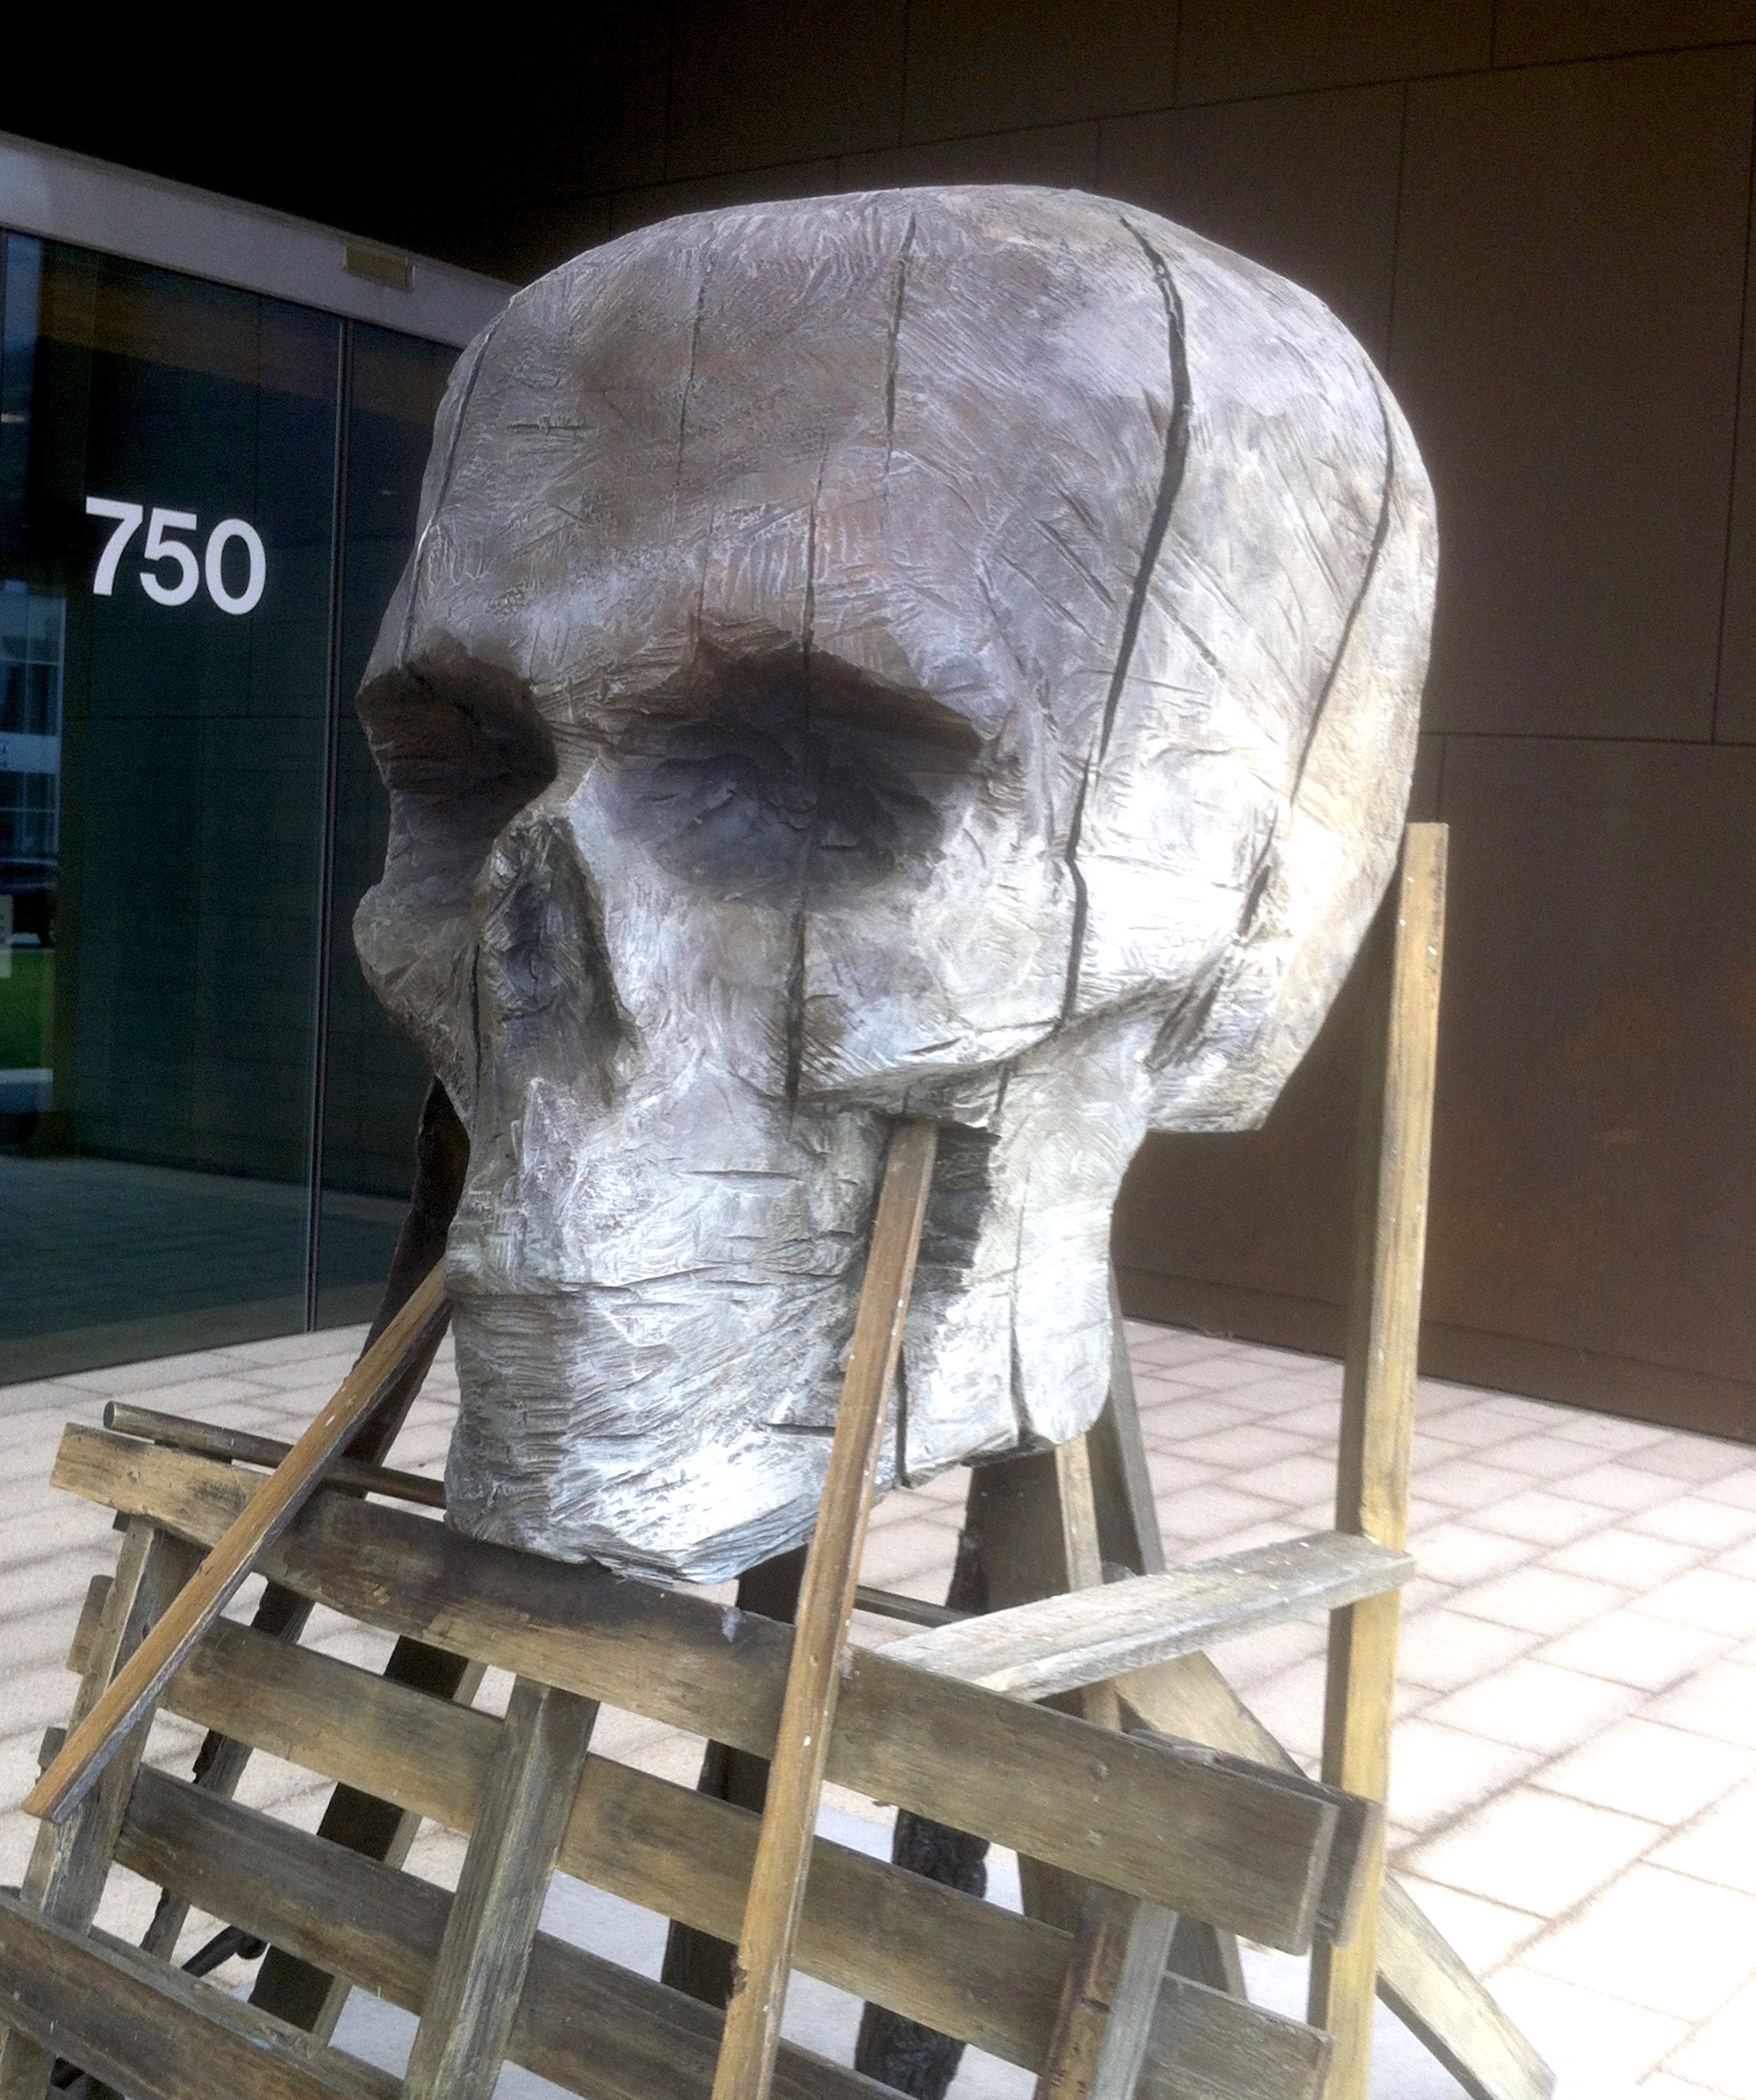 Large wooden skull on display outside the entrance to the Chazen Museum of Art.